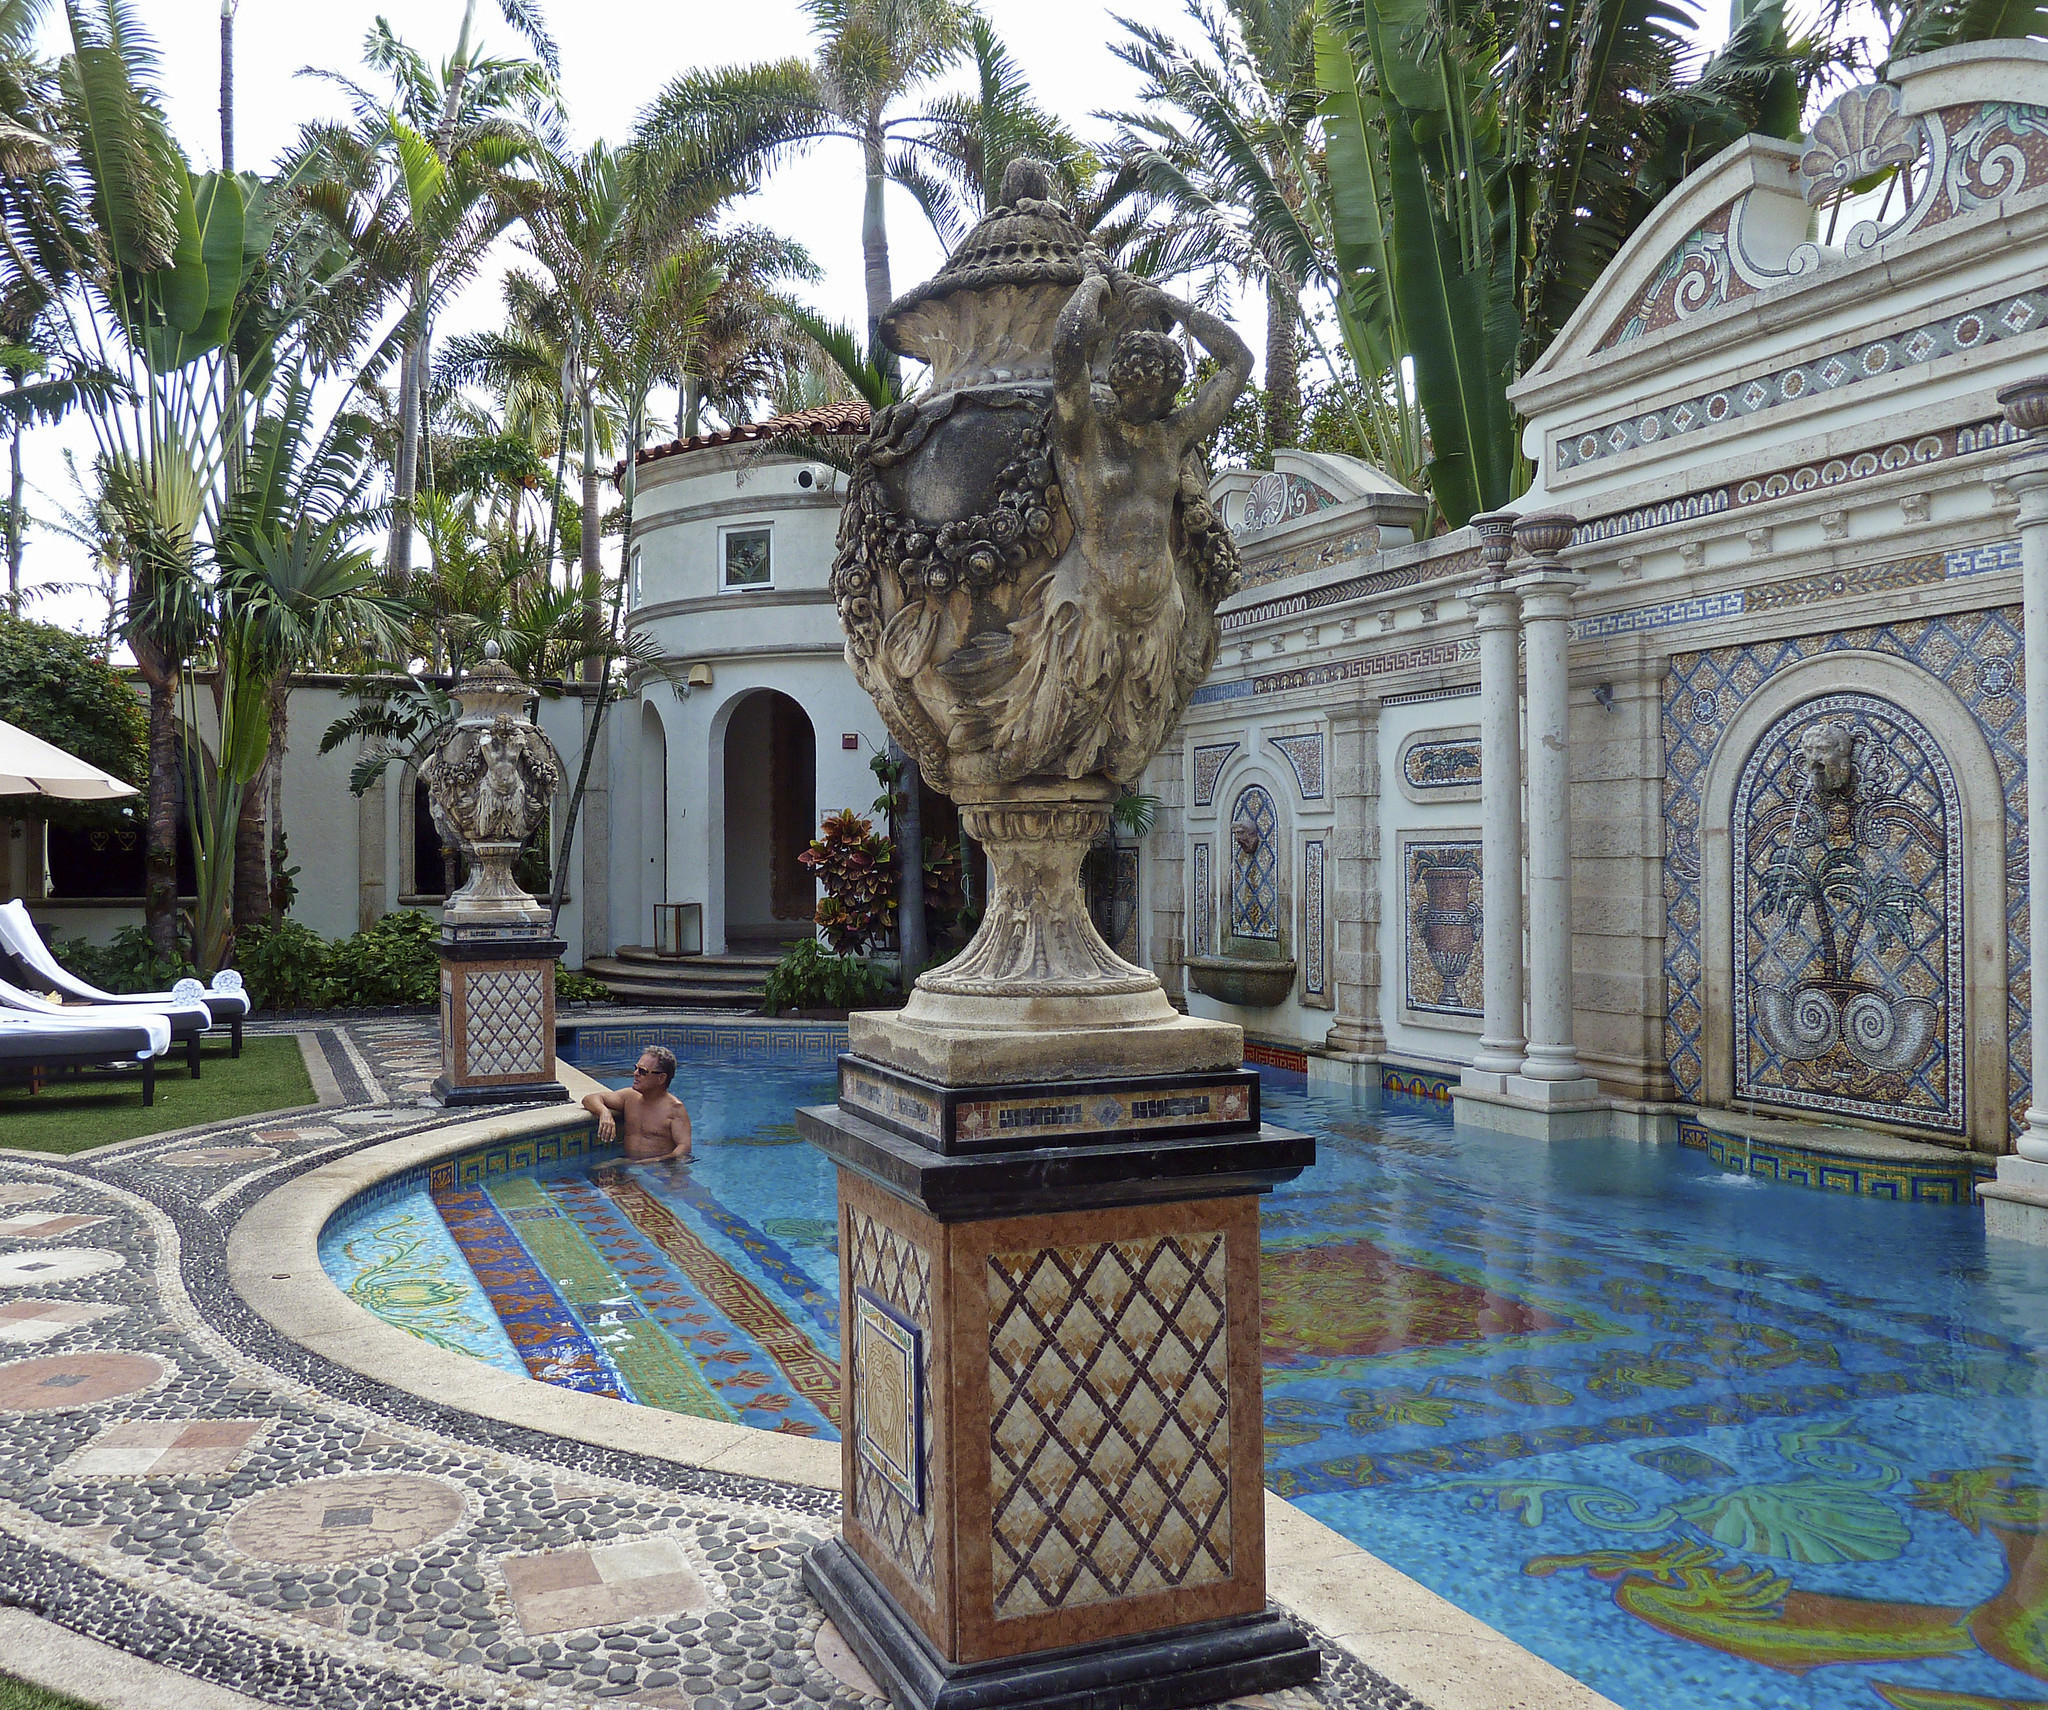 New Versace miniseries stirs curiosity about his mansion, now a luxury